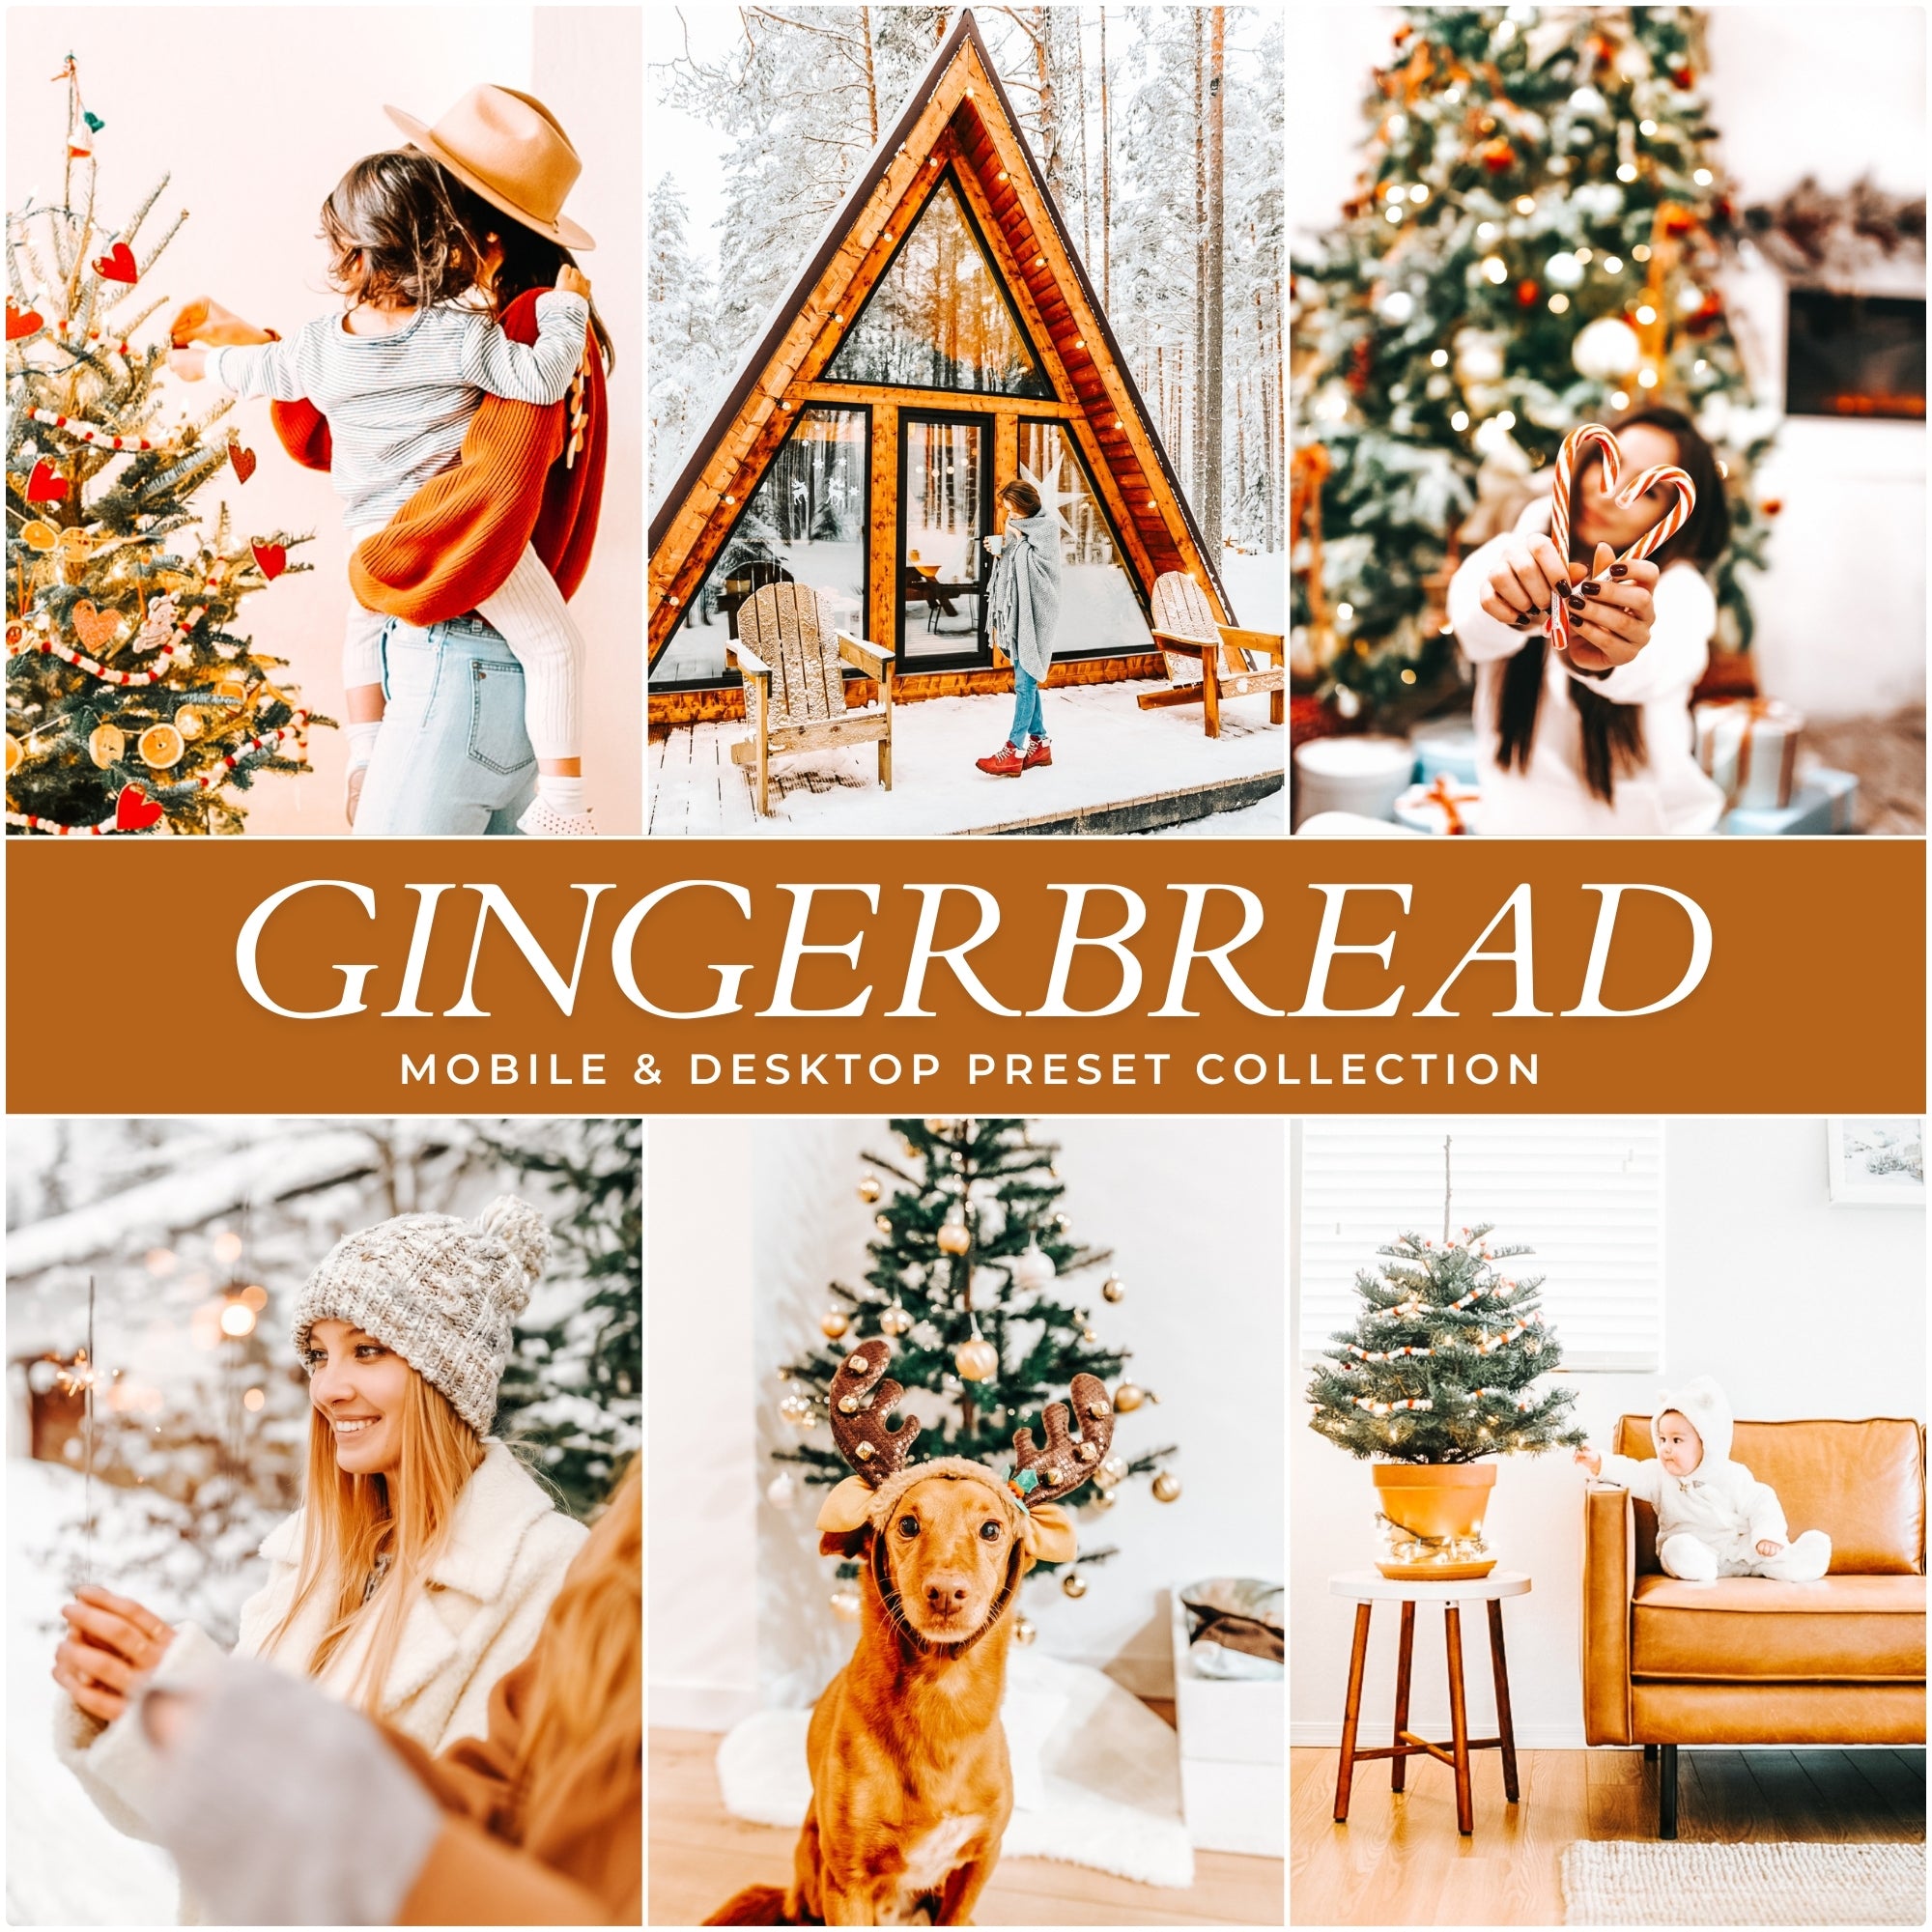 Winter Christmas Lightroom Presets The Best Photo Editing Preset Filters For Christmas And Winter Holiday Photos with Adobe Lightroom Mobile And Desktop For Photographers and Instagram Influencers By Lou And Marks Presets